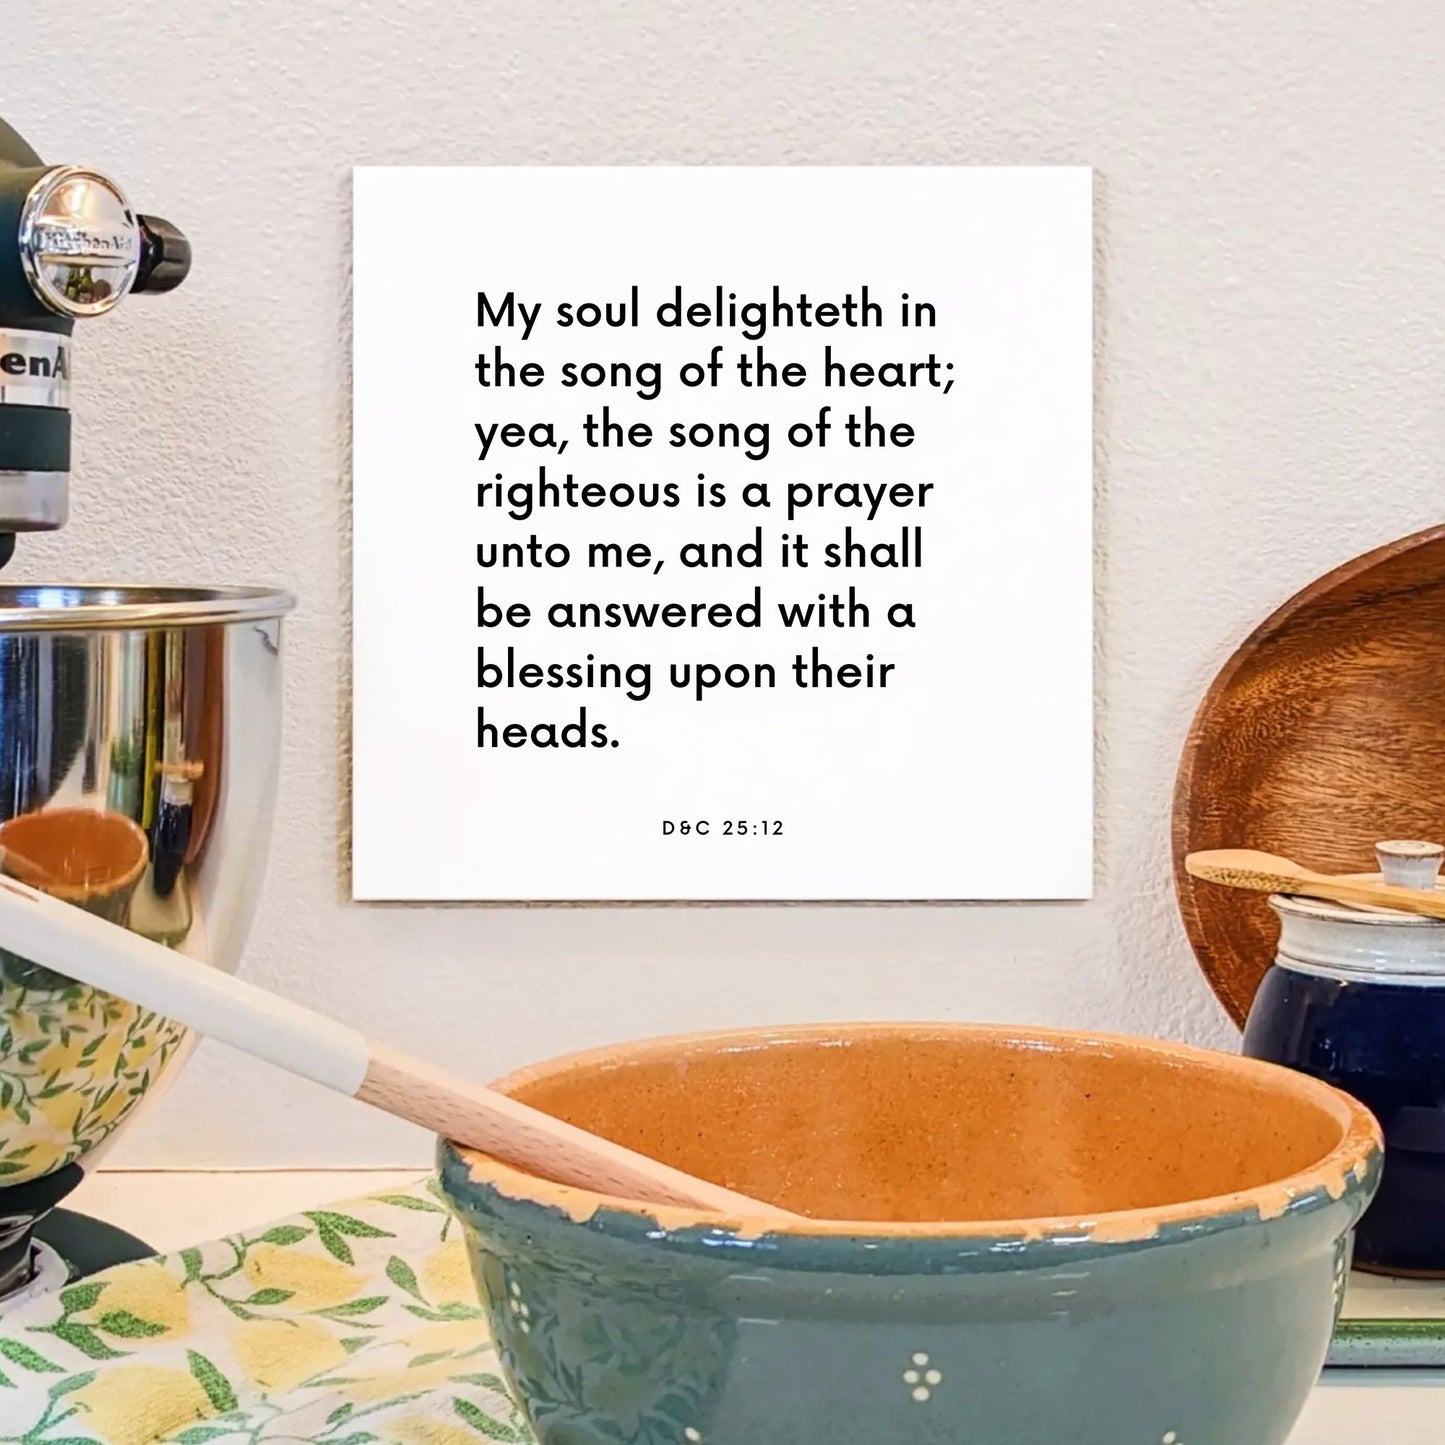 Kitchen mouting of the scripture tile for D&C 25:12 - "The song of the righteous is a prayer unto me"